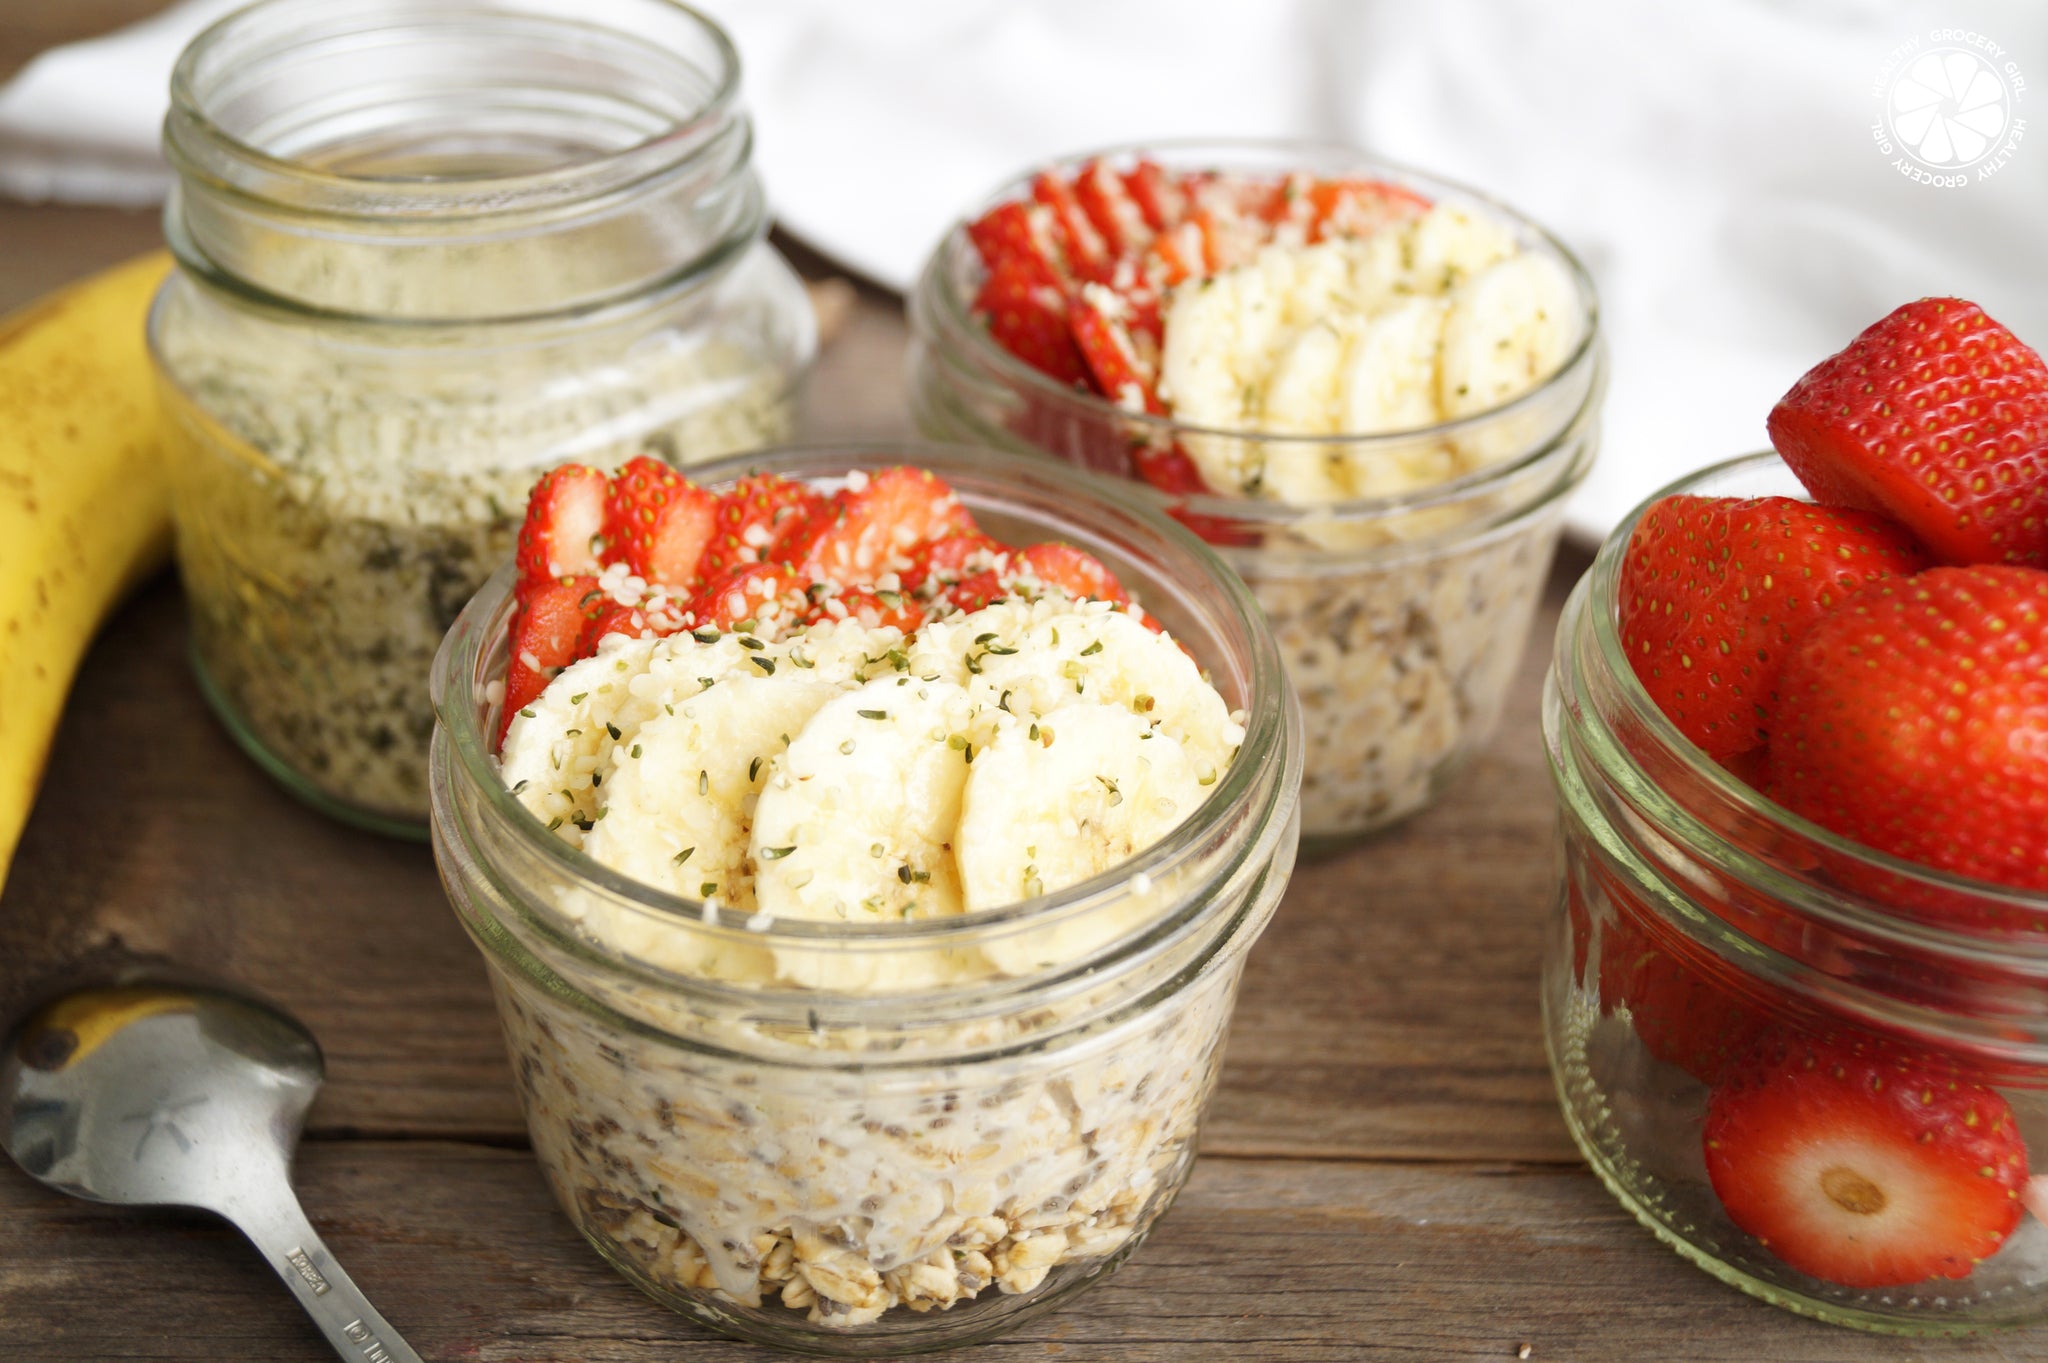 10 Ways to Make Your Meals SUPER with Hemp Hearts